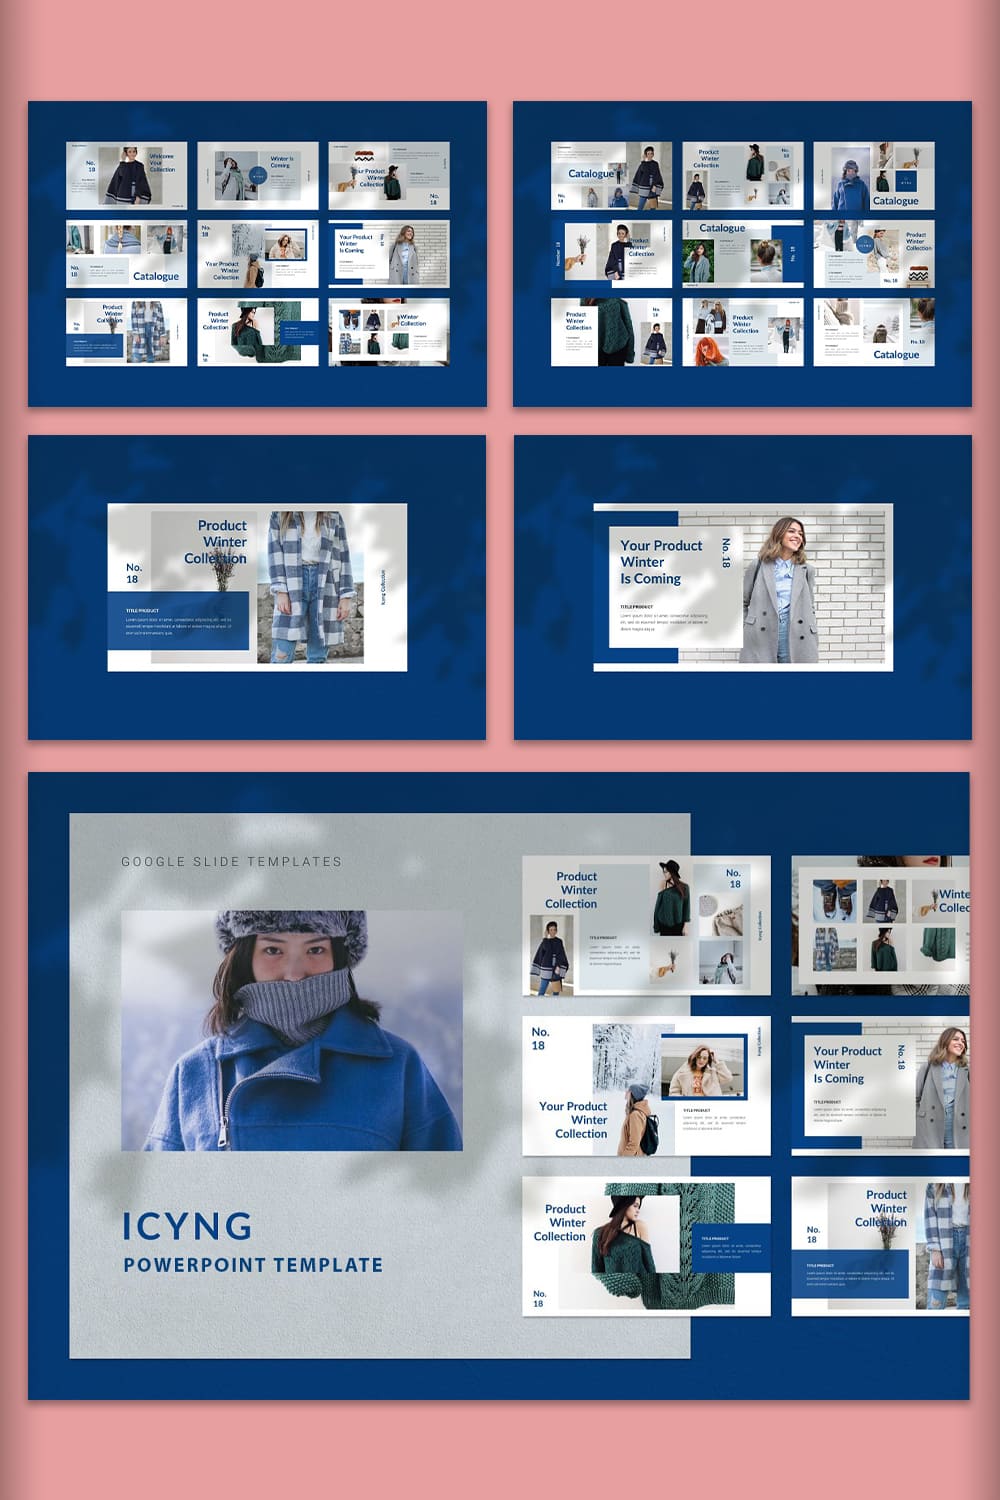 icyng powerpoint template pinterest image.